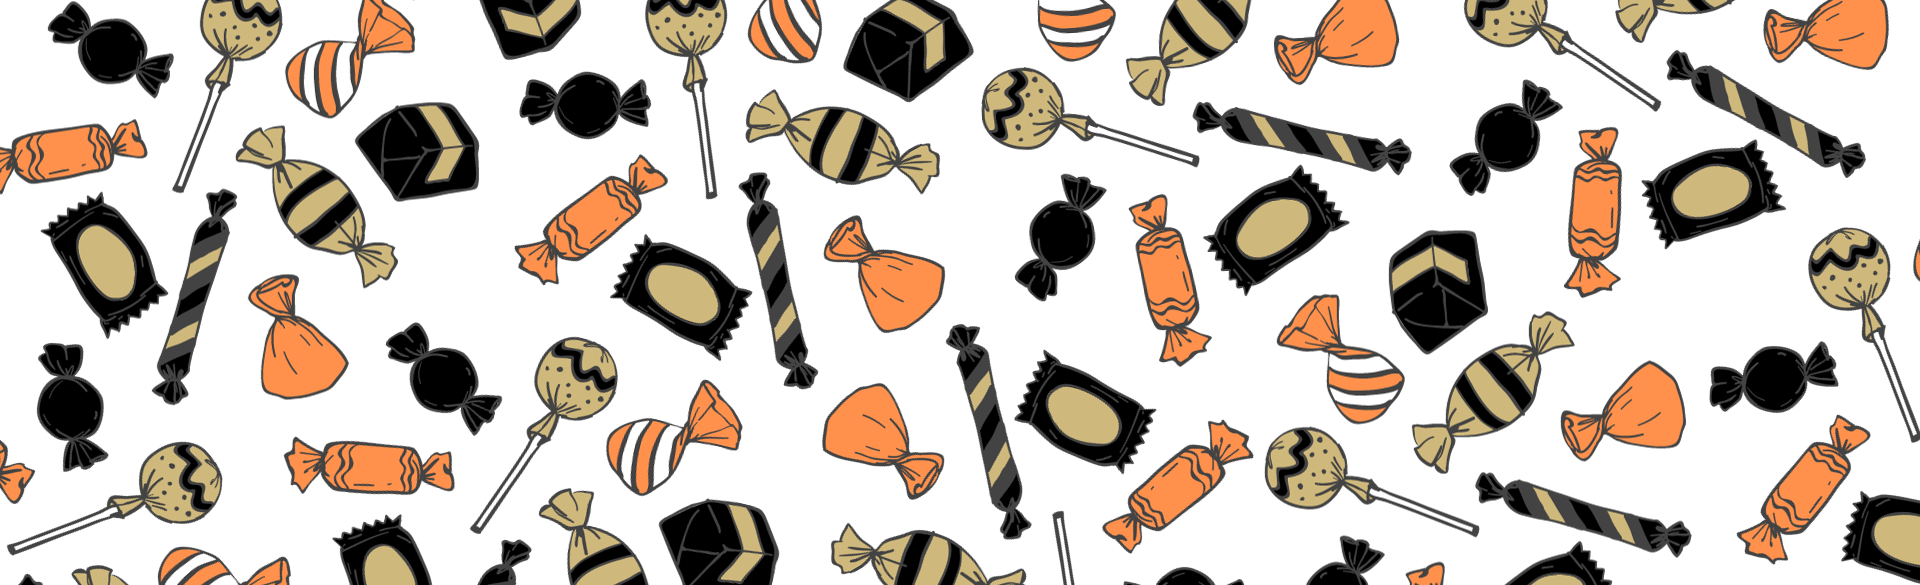 variety of Halloween candy icons in black, gold and orange